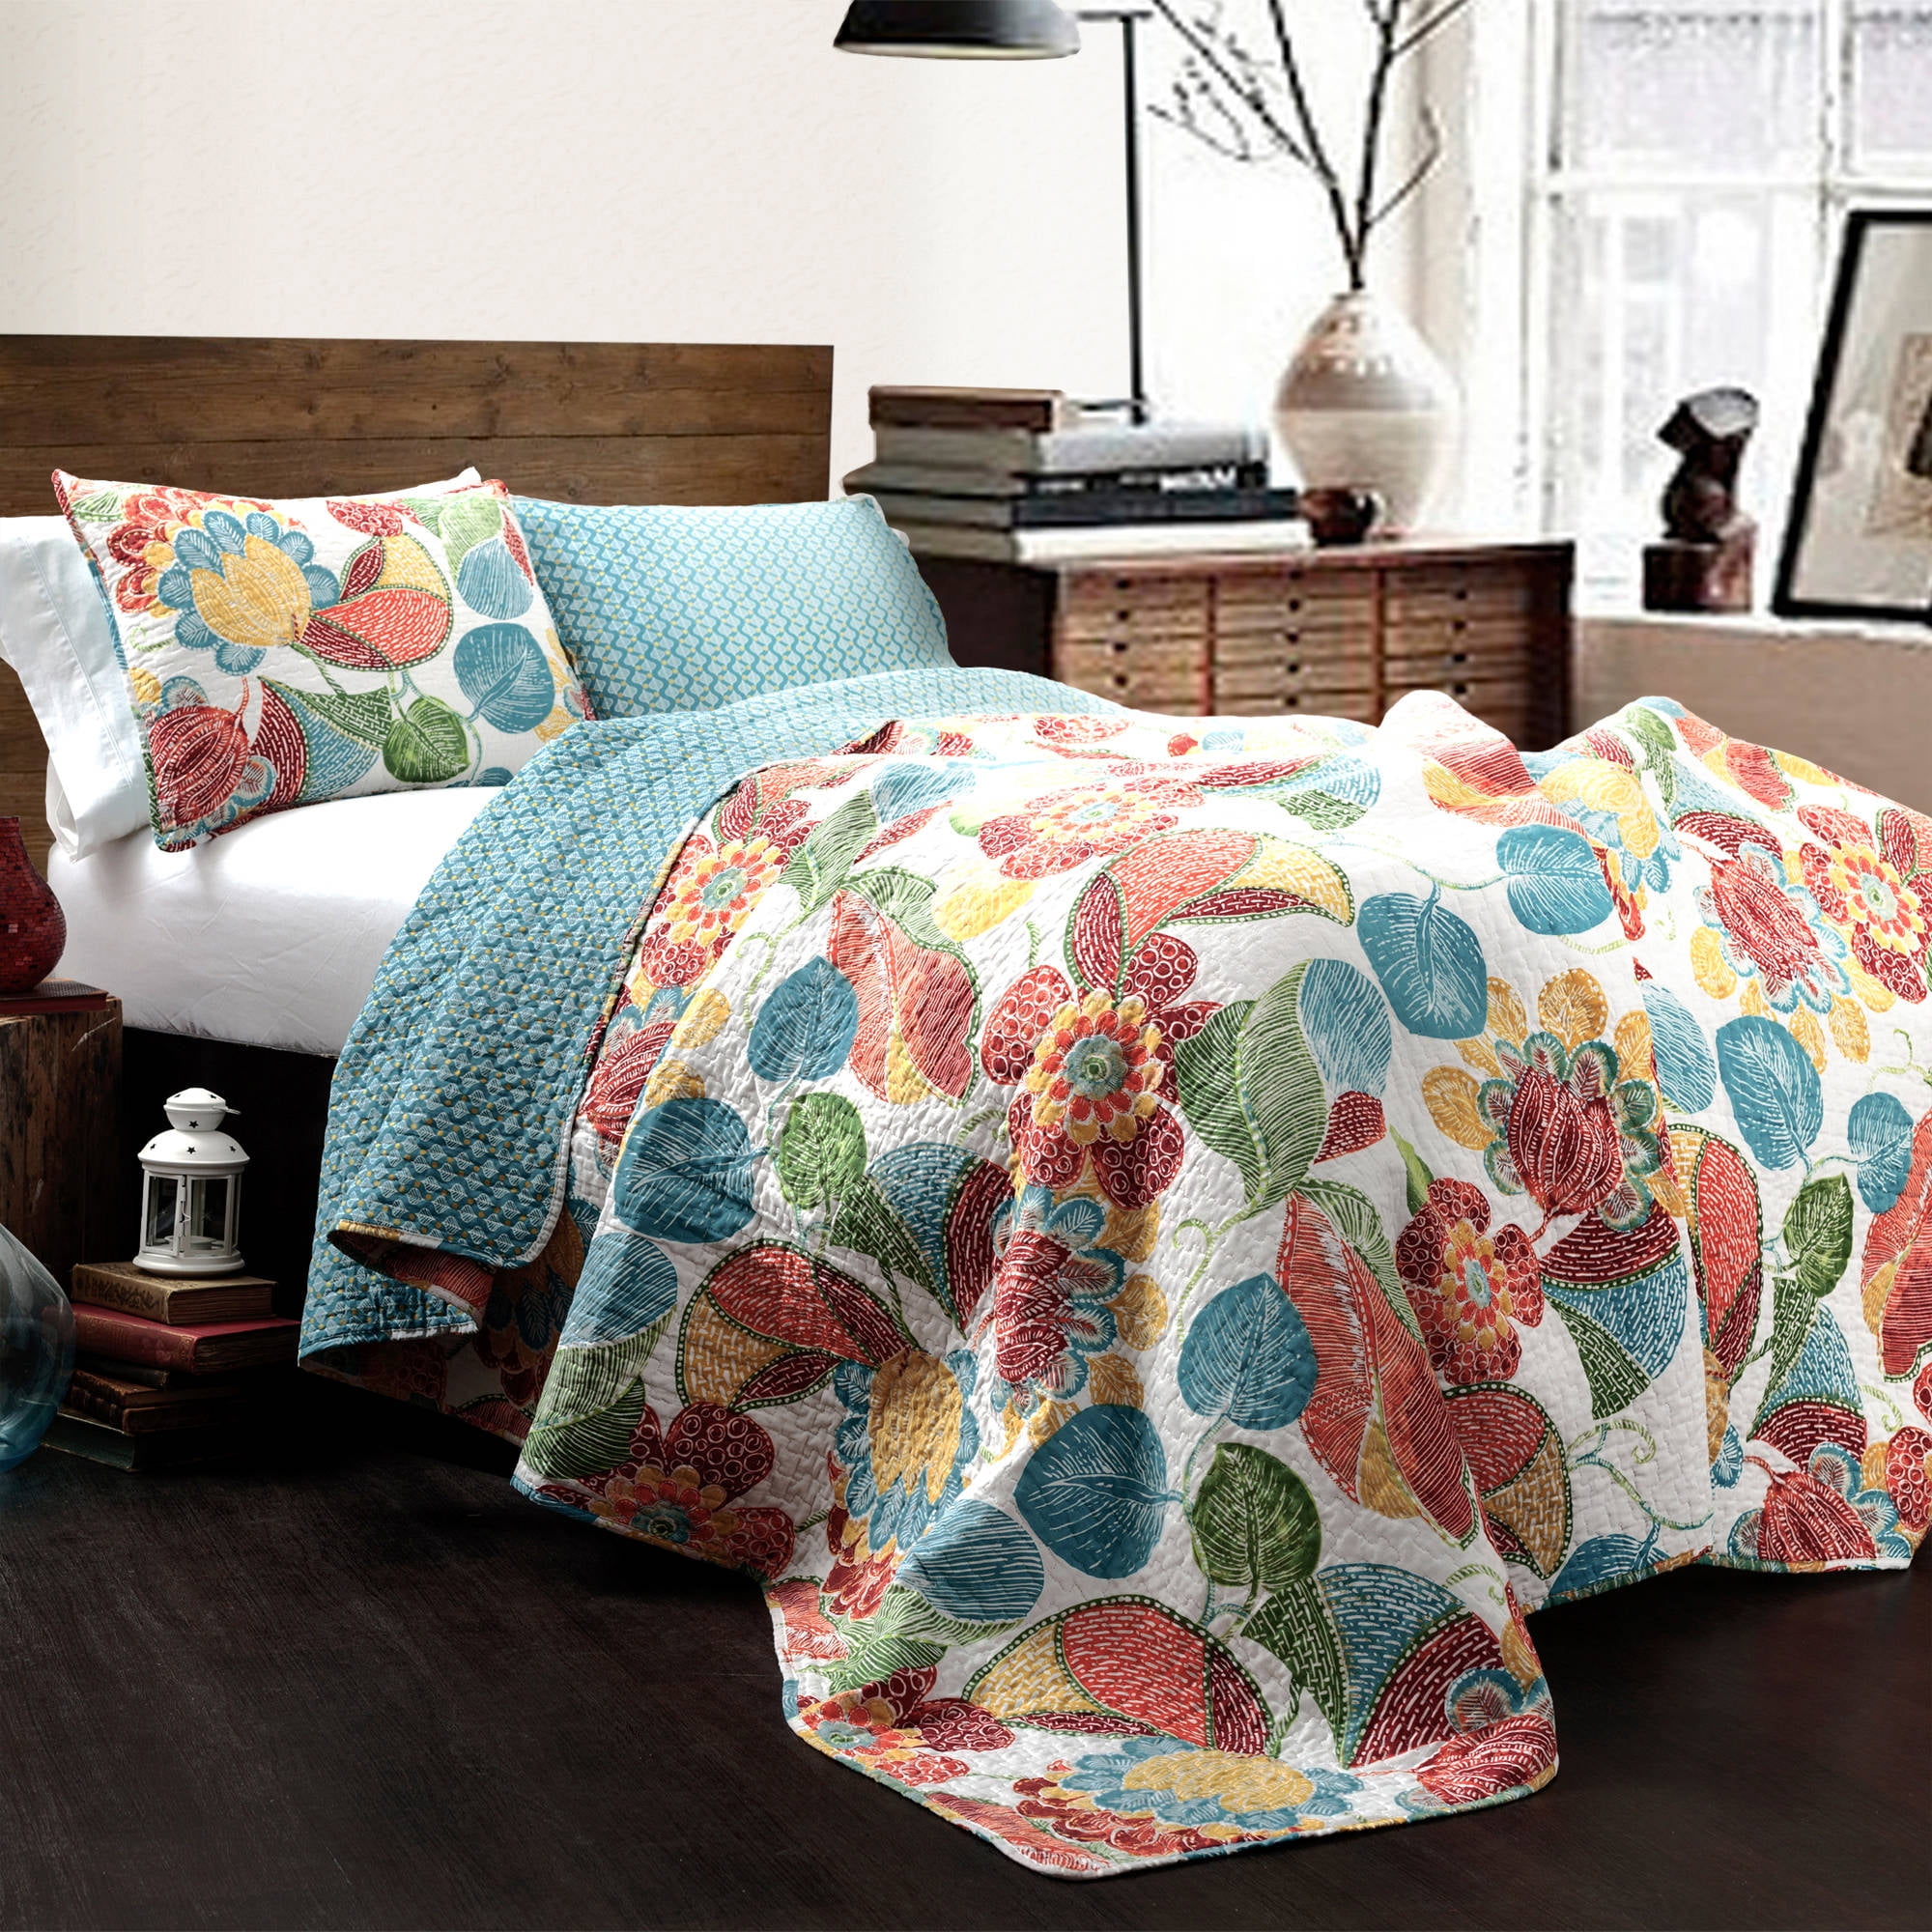 FLOWERS PRINTED REVERSIBLE BEDSPREAD QUILTED SET 3 PCS QUEEN SIZE 